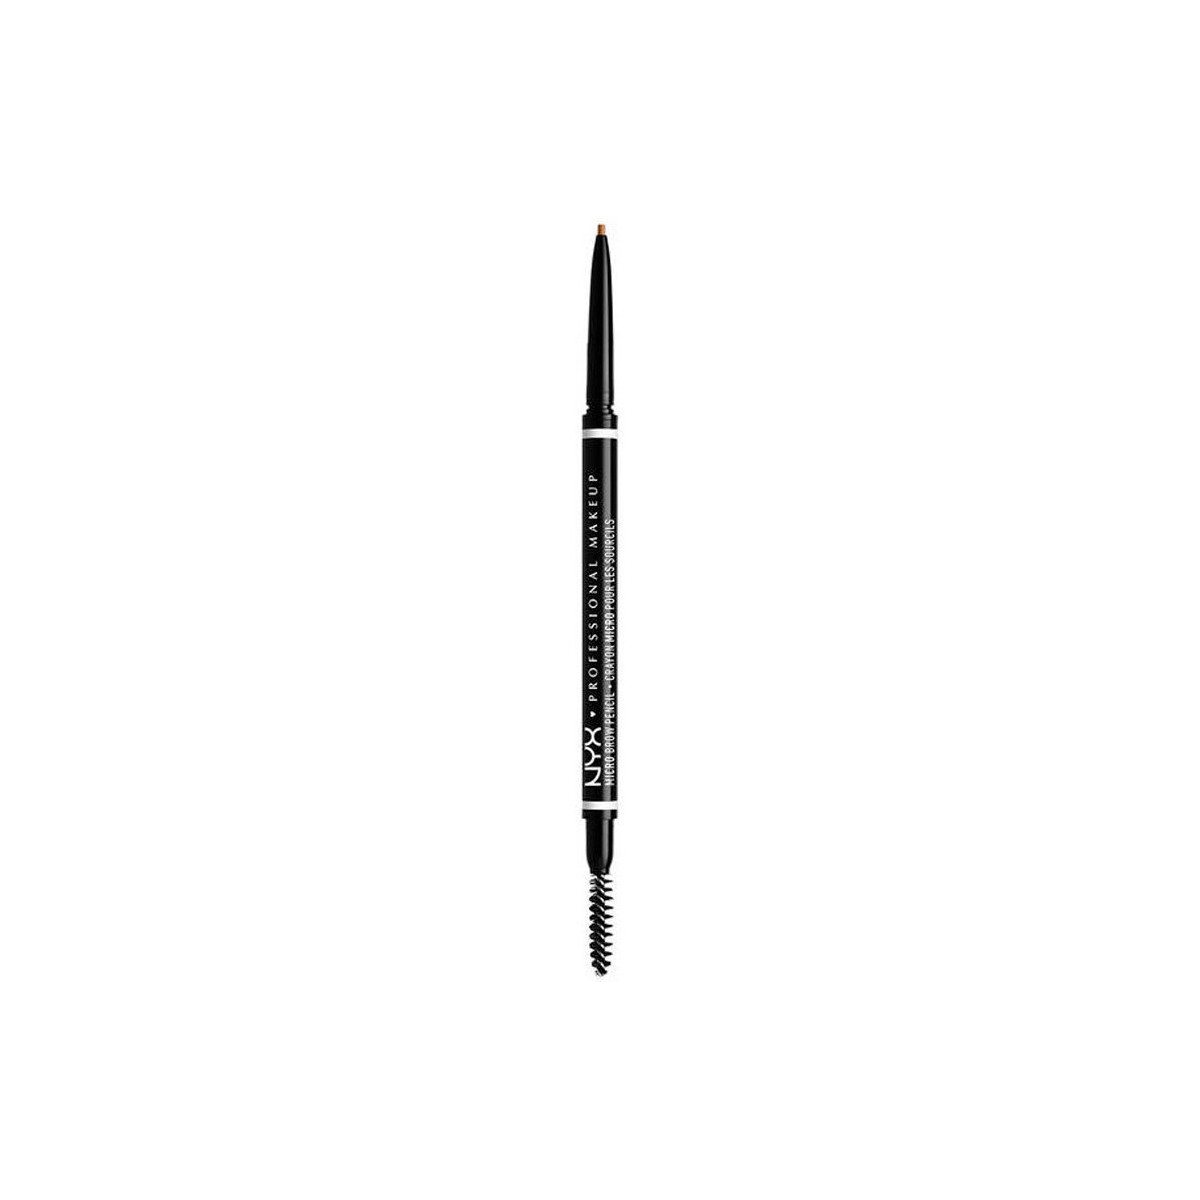 Beauté Femme Maquillage Sourcils Nyx Professional Make Up Micro Brow Pencil blonde 